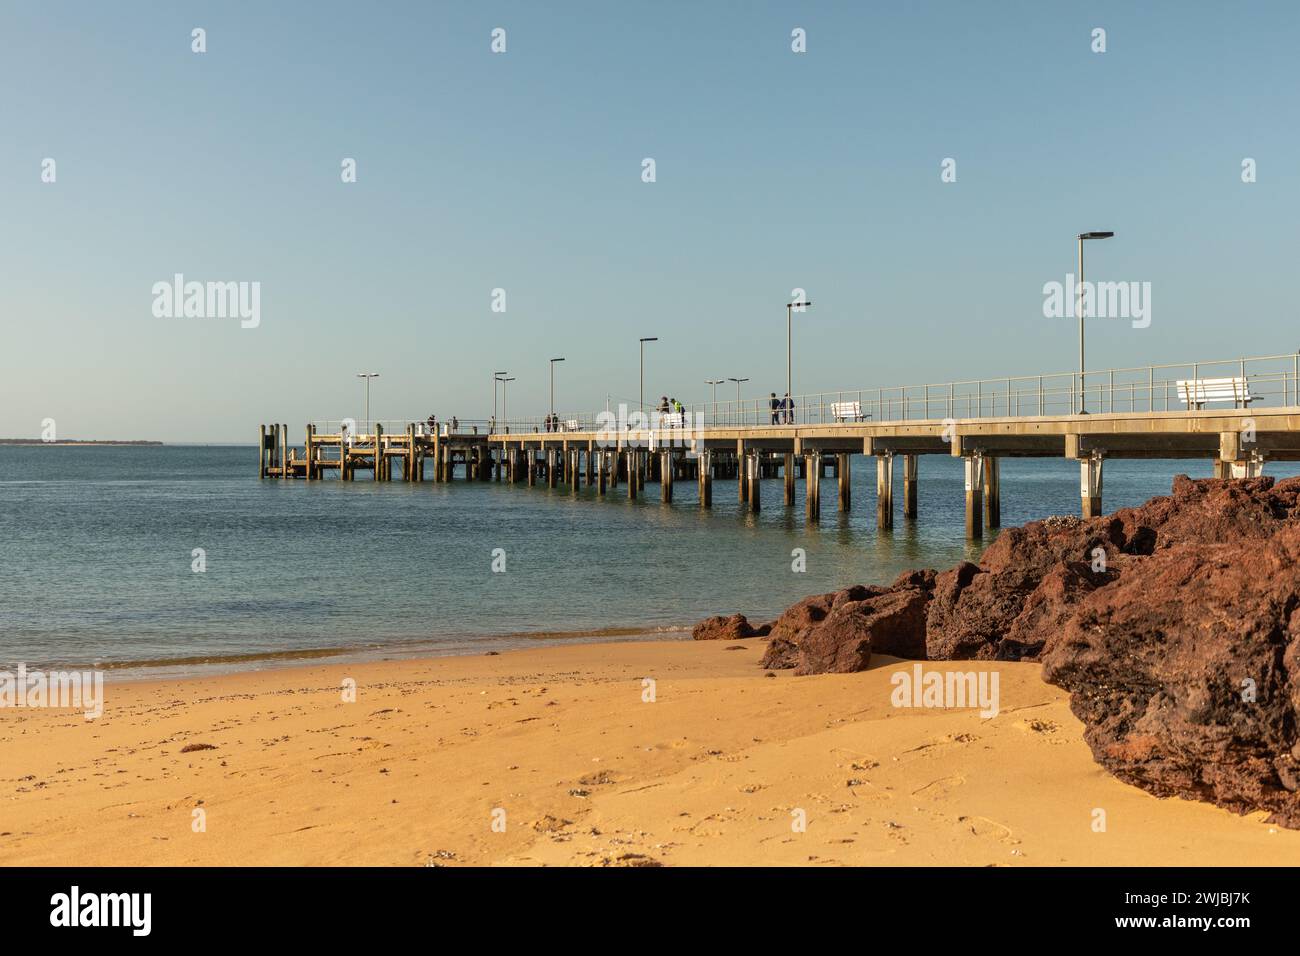 The Cowes jetty, on Phillip Island south of Melbourne, is a popular fishing and tourist spot overlooking the waters of Western Port Bay. Stock Photo